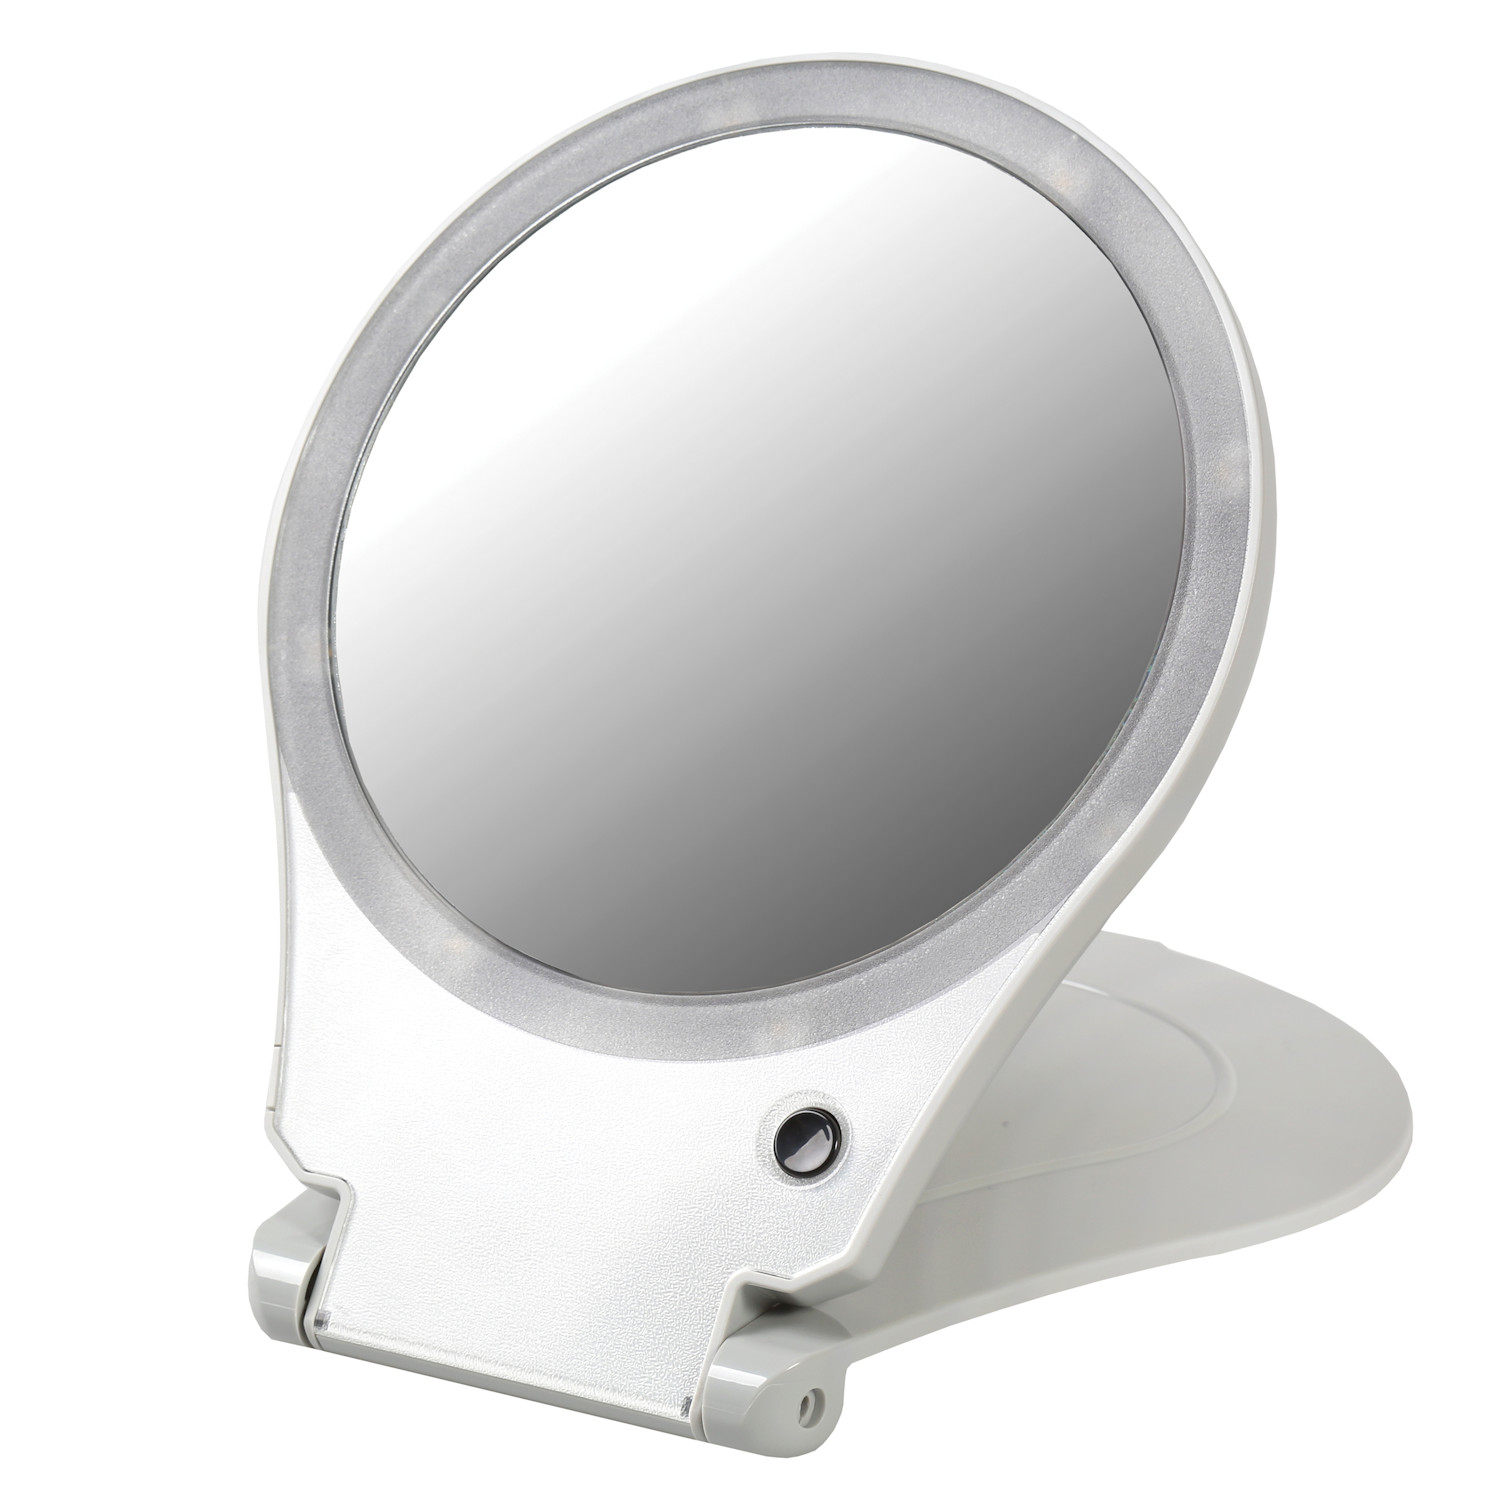 Floxite 10x Magnification Lighted, Floxite 10x Lighted Mirror